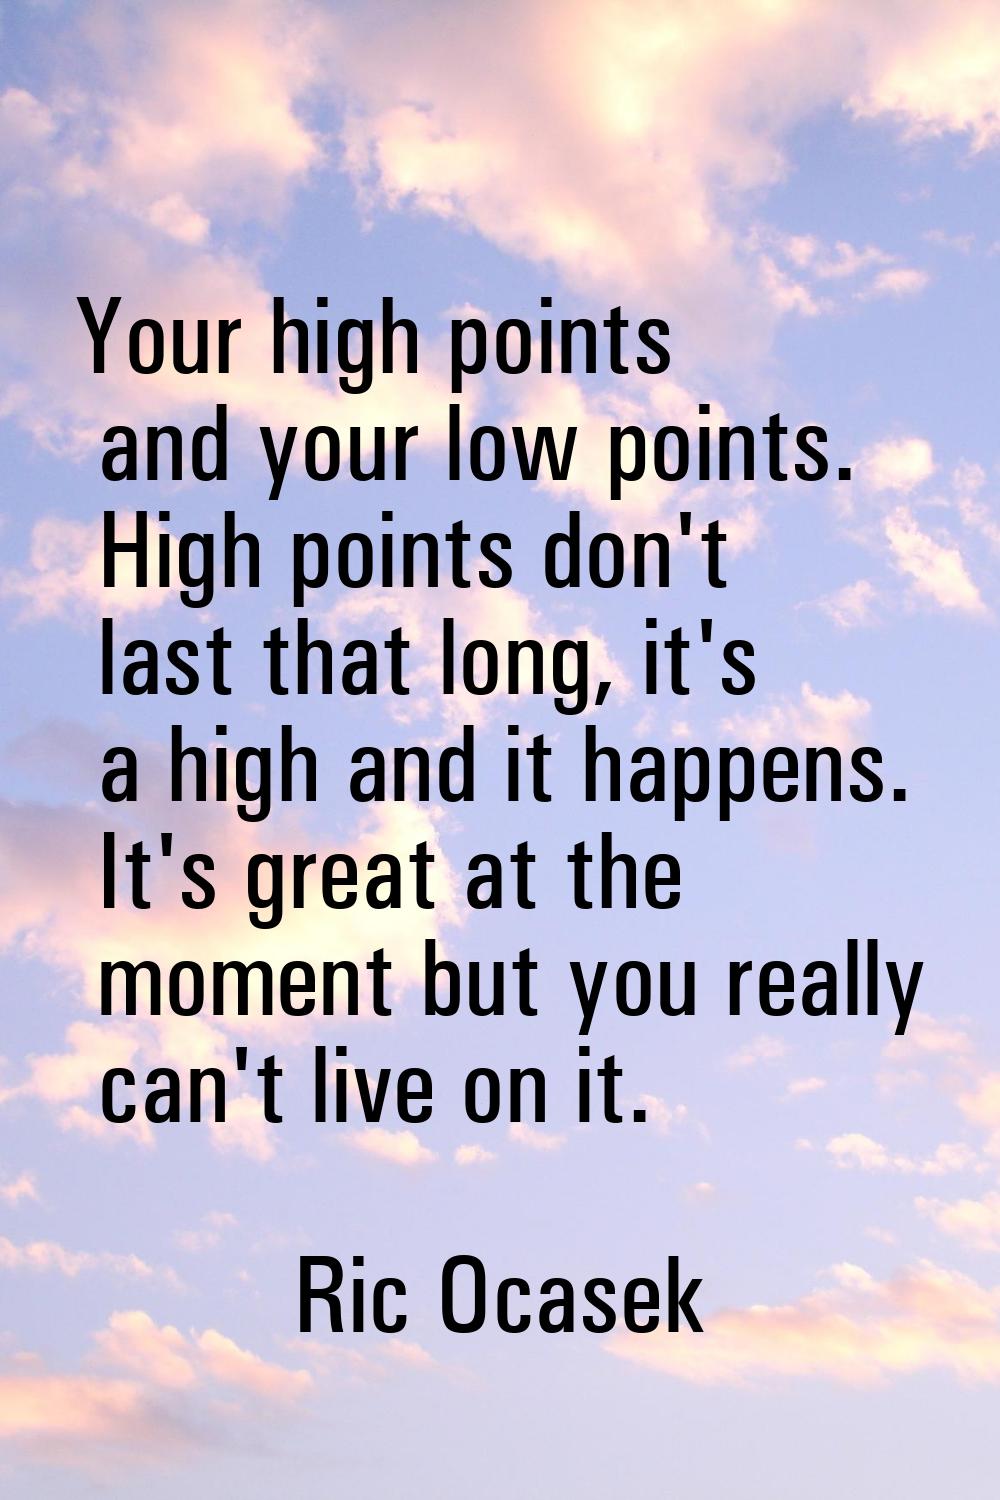 Your high points and your low points. High points don't last that long, it's a high and it happens.